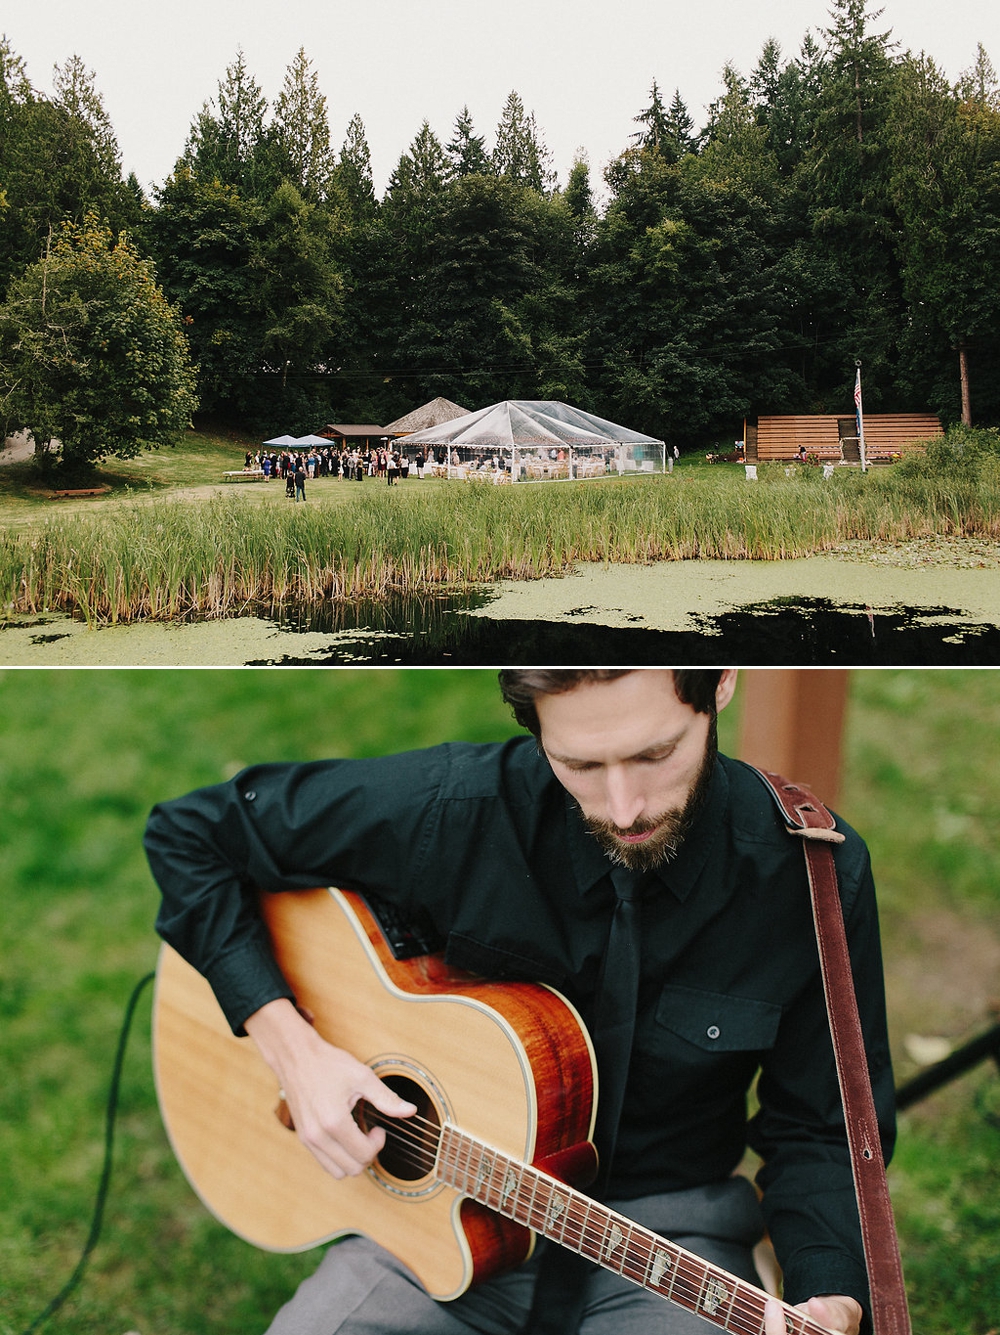 Wedding Guitarist and Clear Top Tent